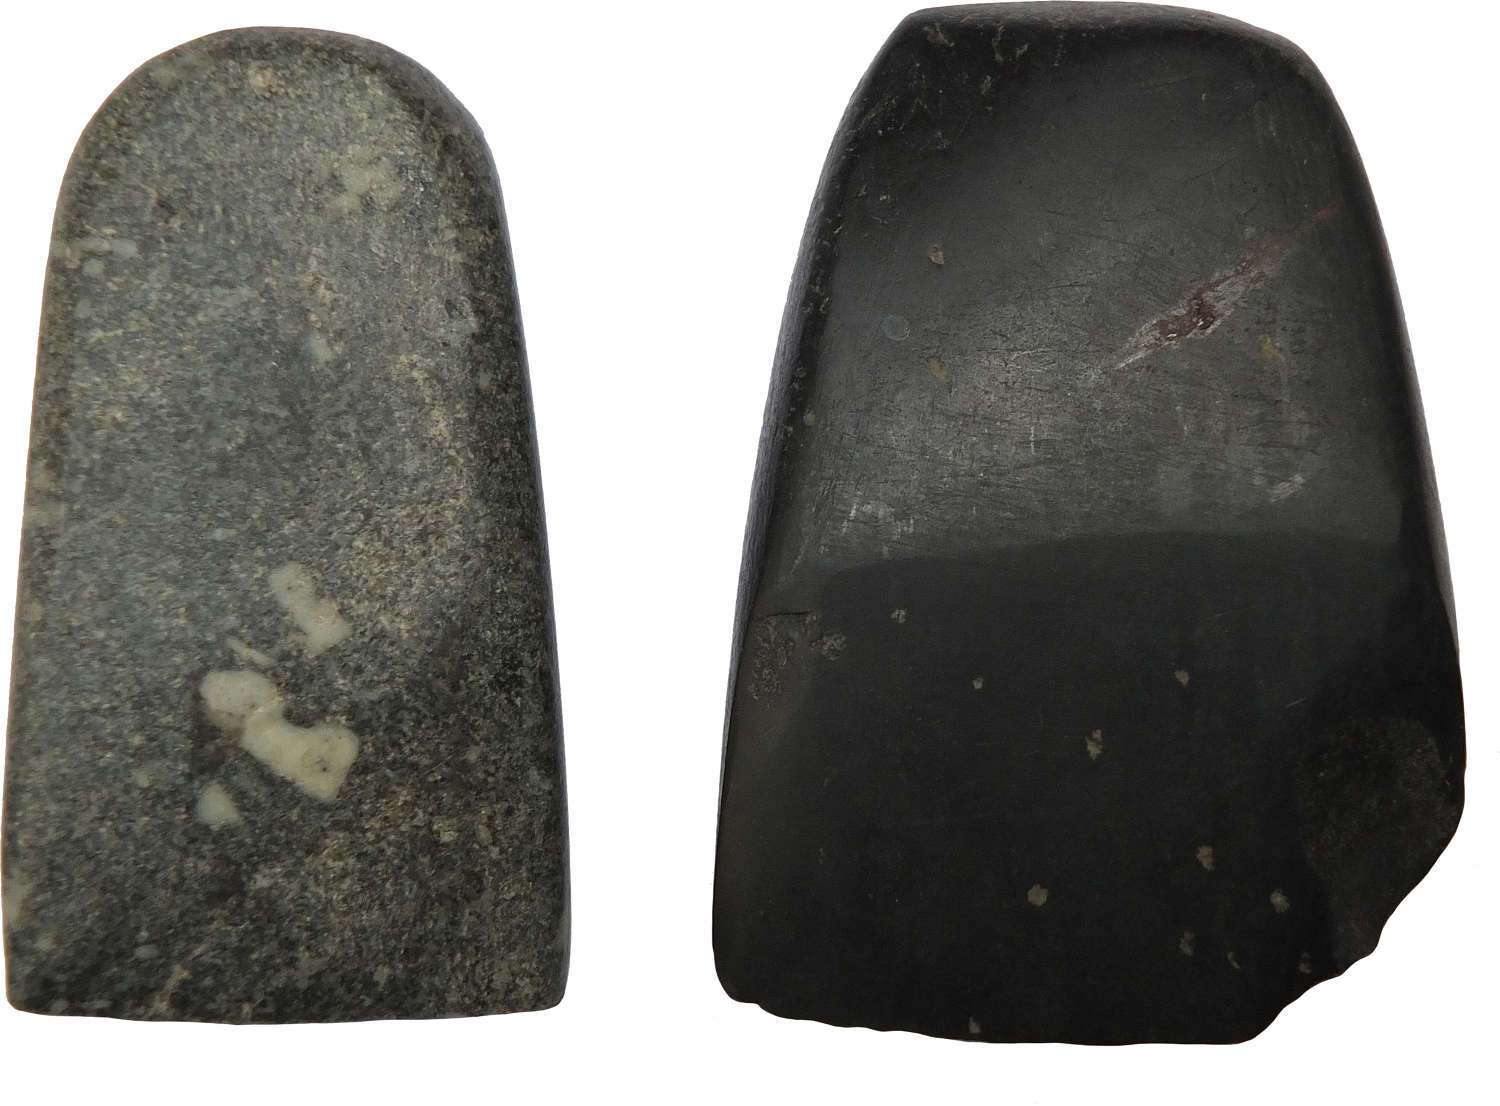 Two small dark stone polished axeheads